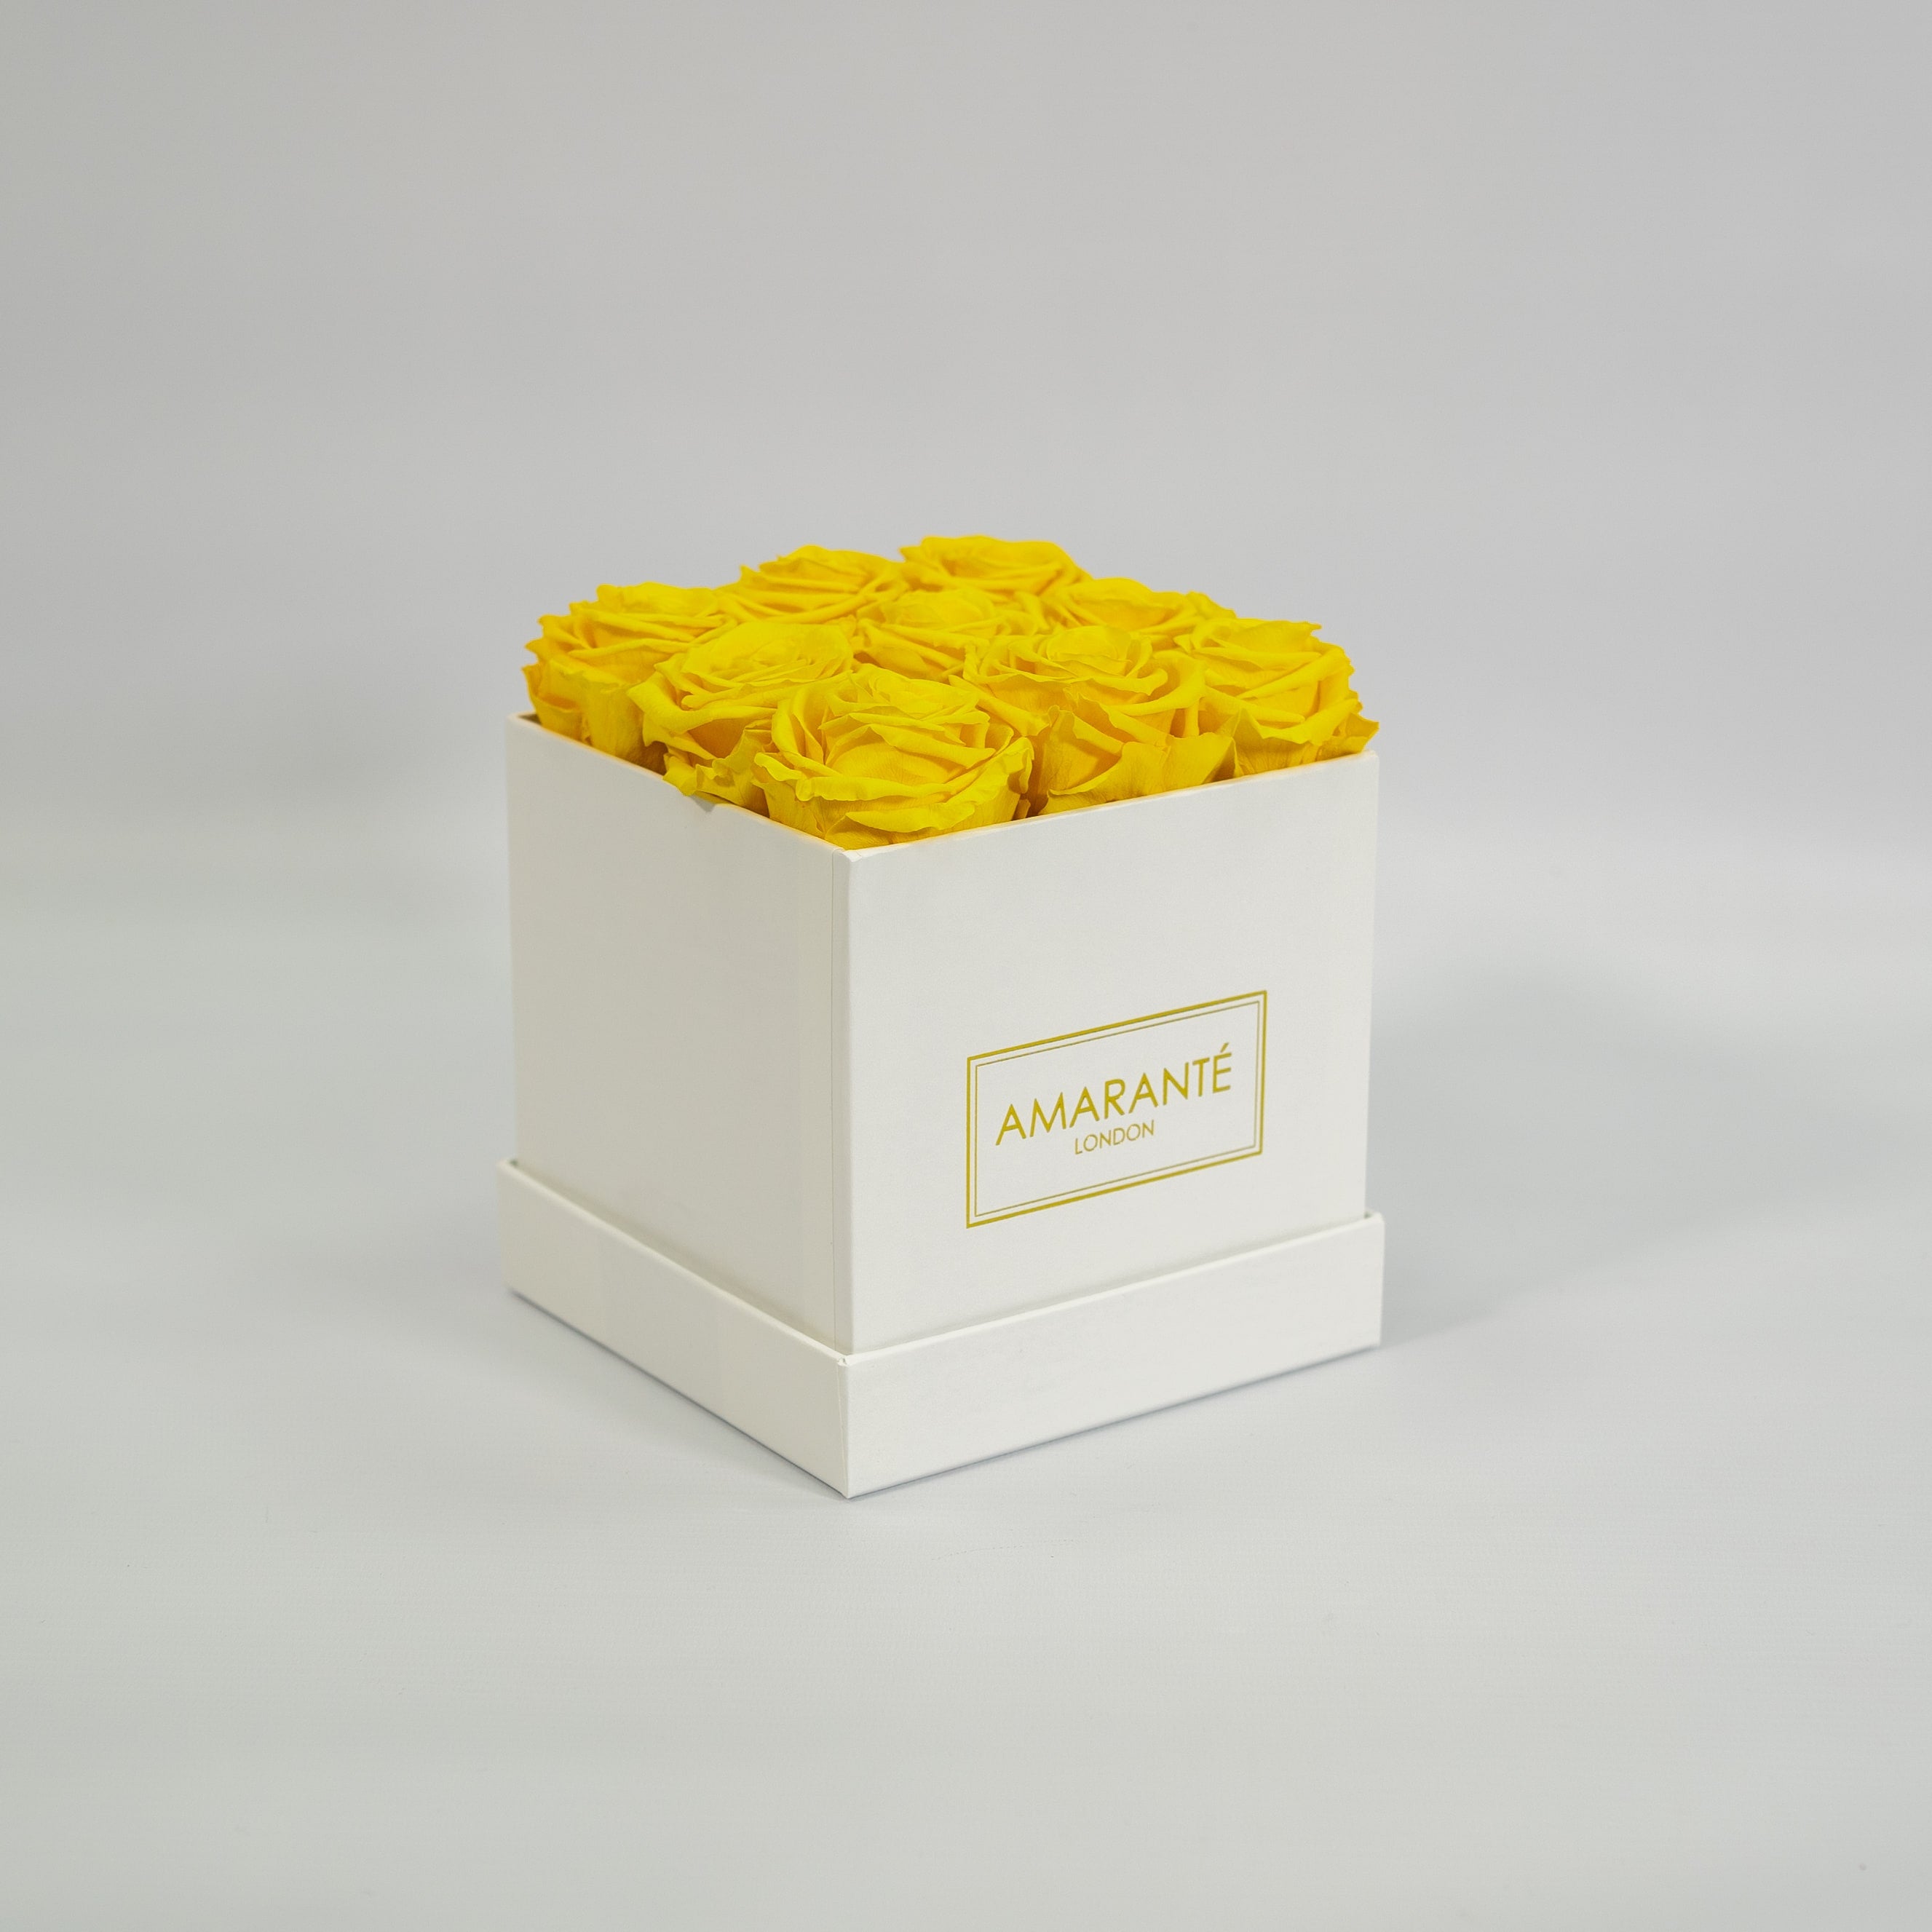 Delightful yellow roses imbedded in a magical white box